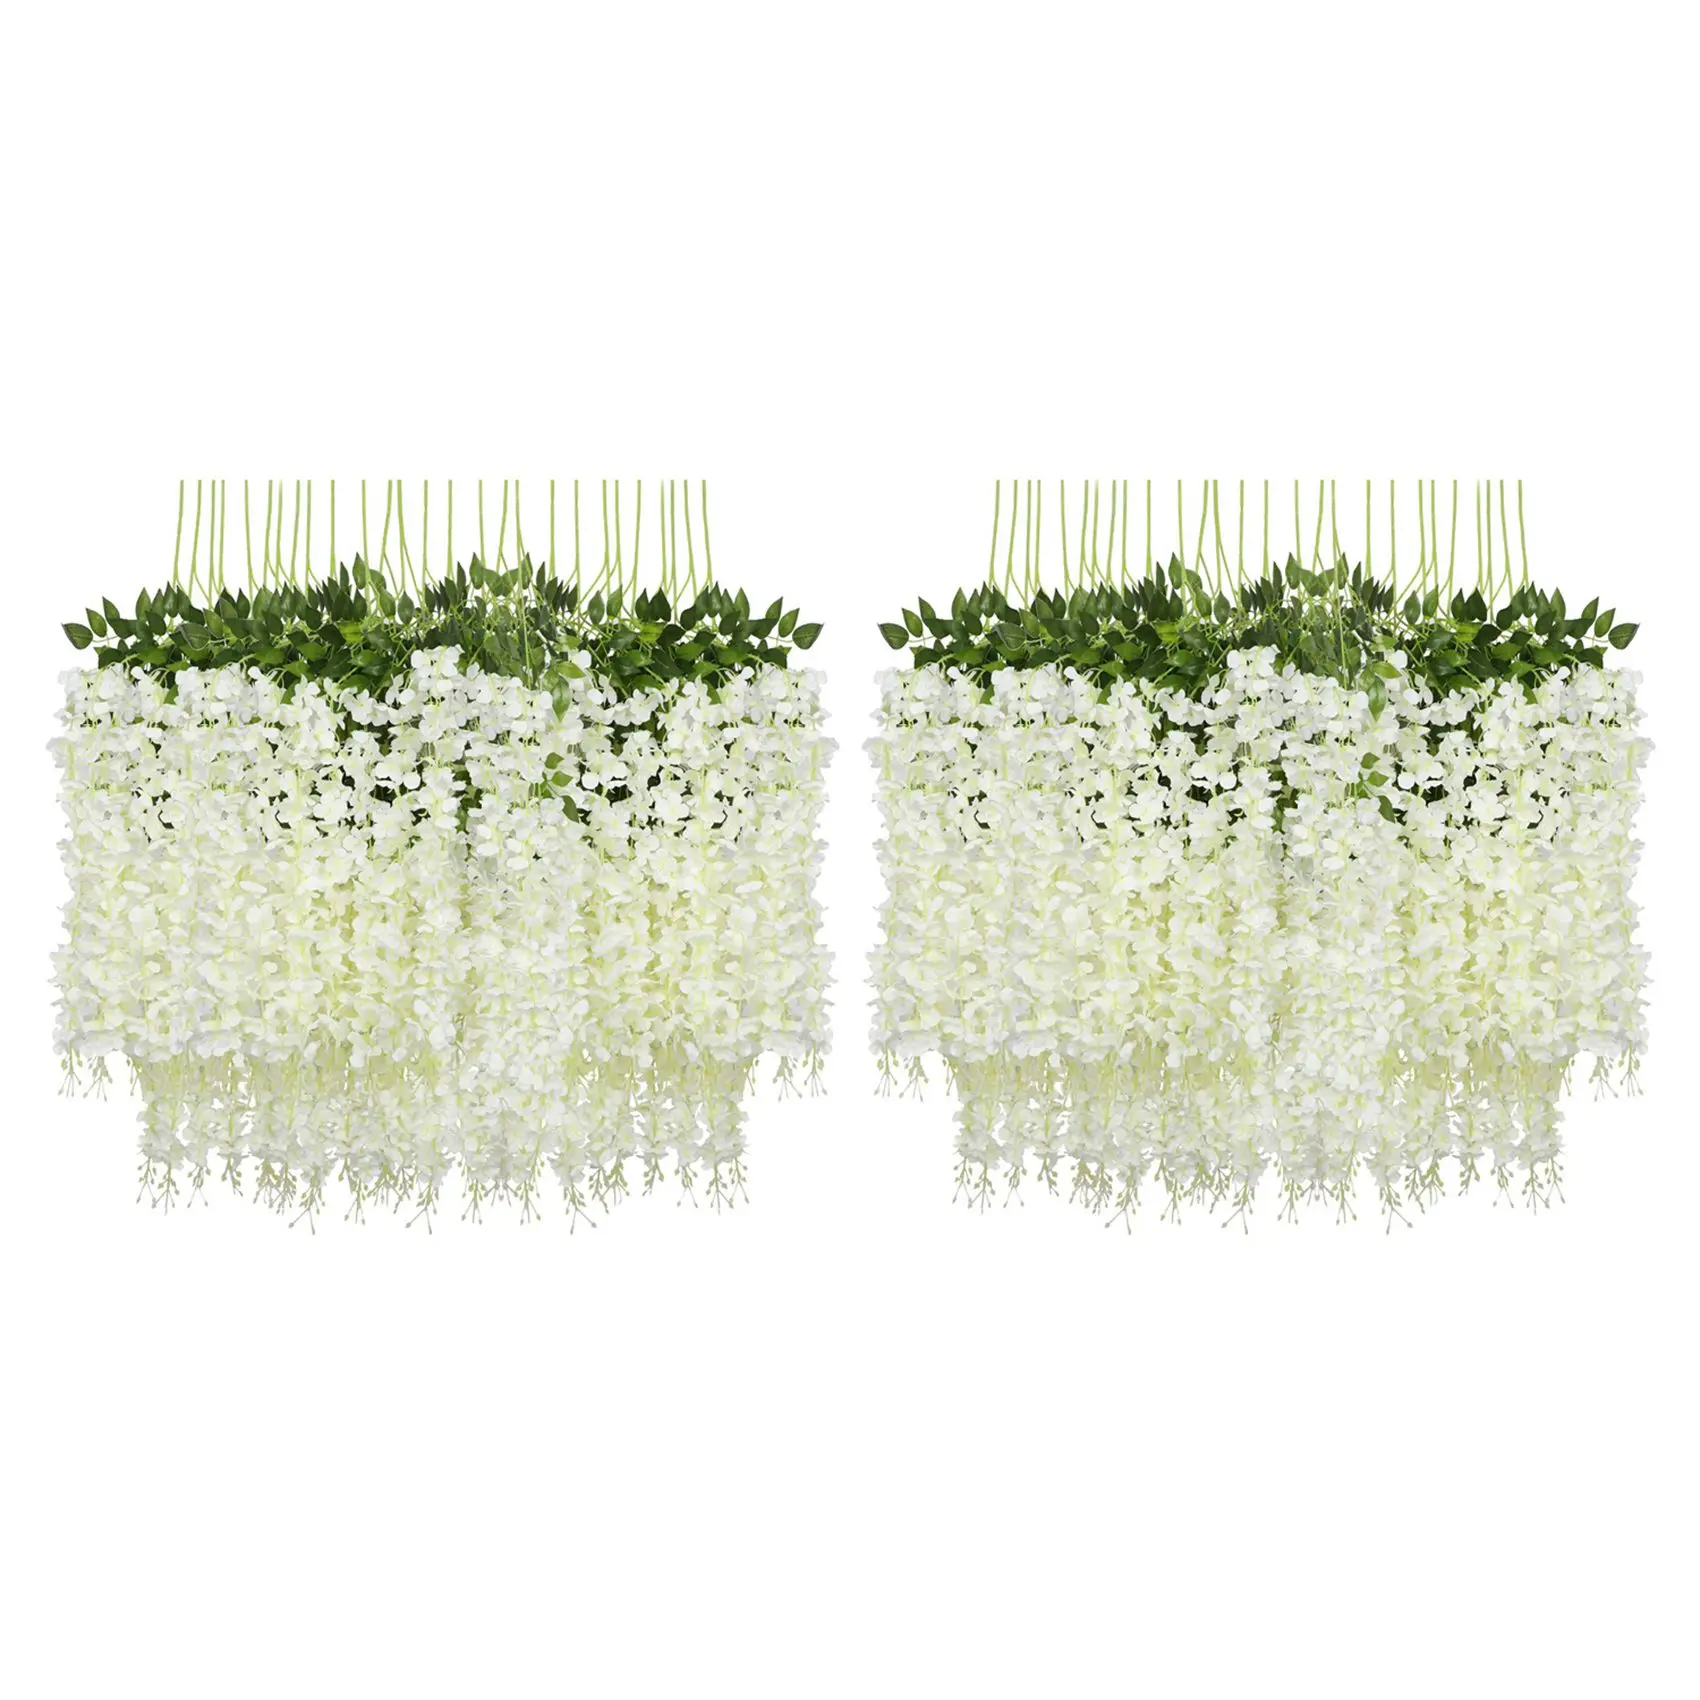 

24 Pack (43.2 FT) Artificial Wisteria Vine Fake Wisteria Hanging Garland Silk Long Bush String Home Party Decor